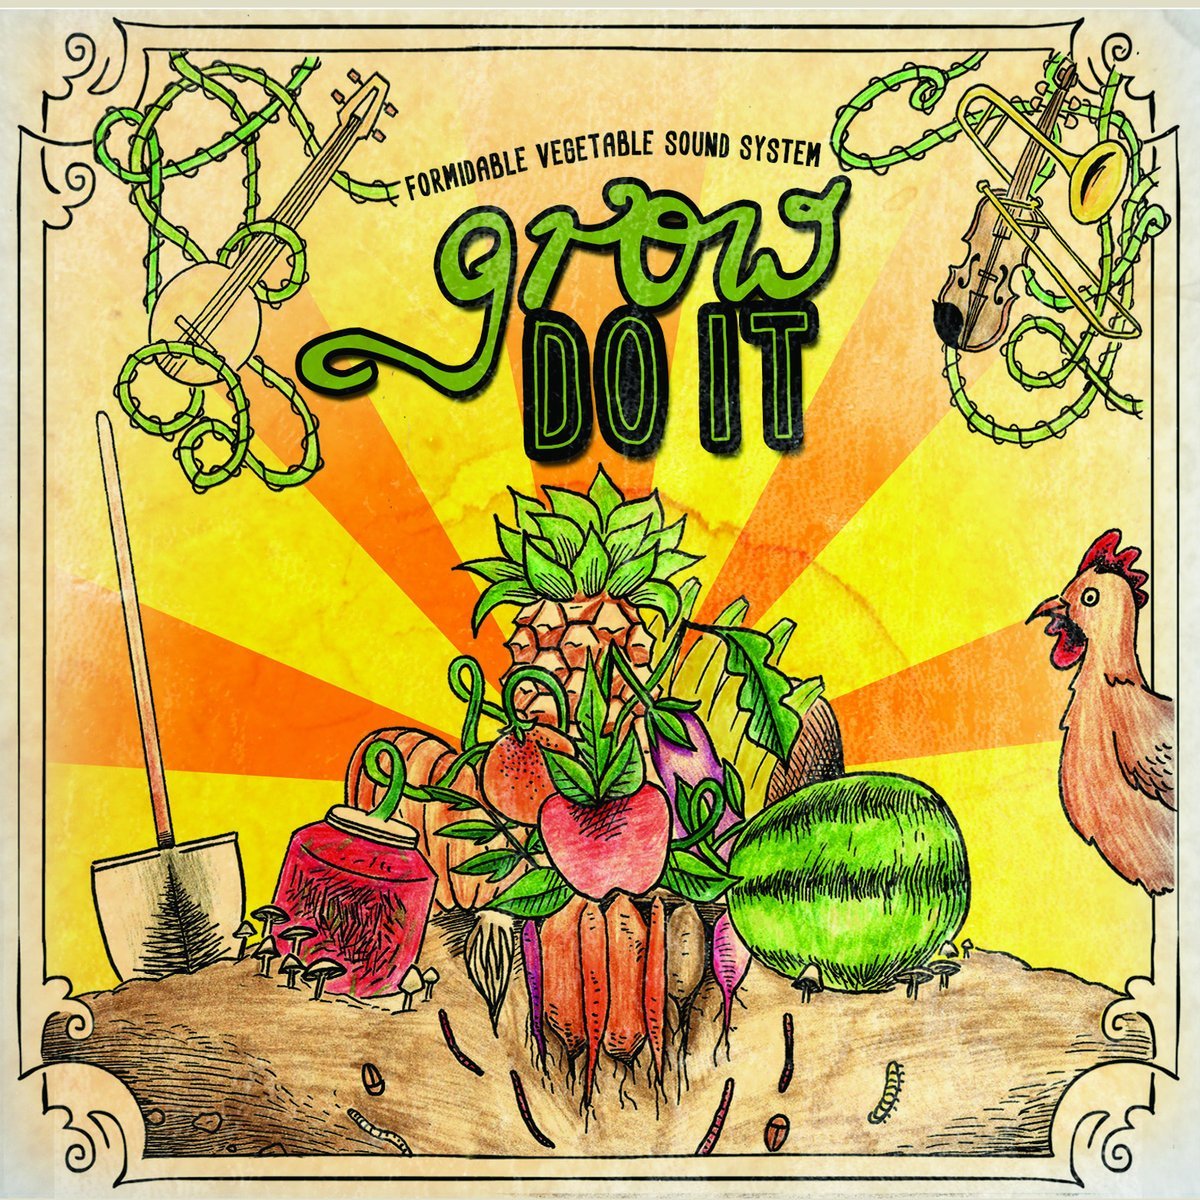 Grow Do It - Formidable Vegetable Sound System